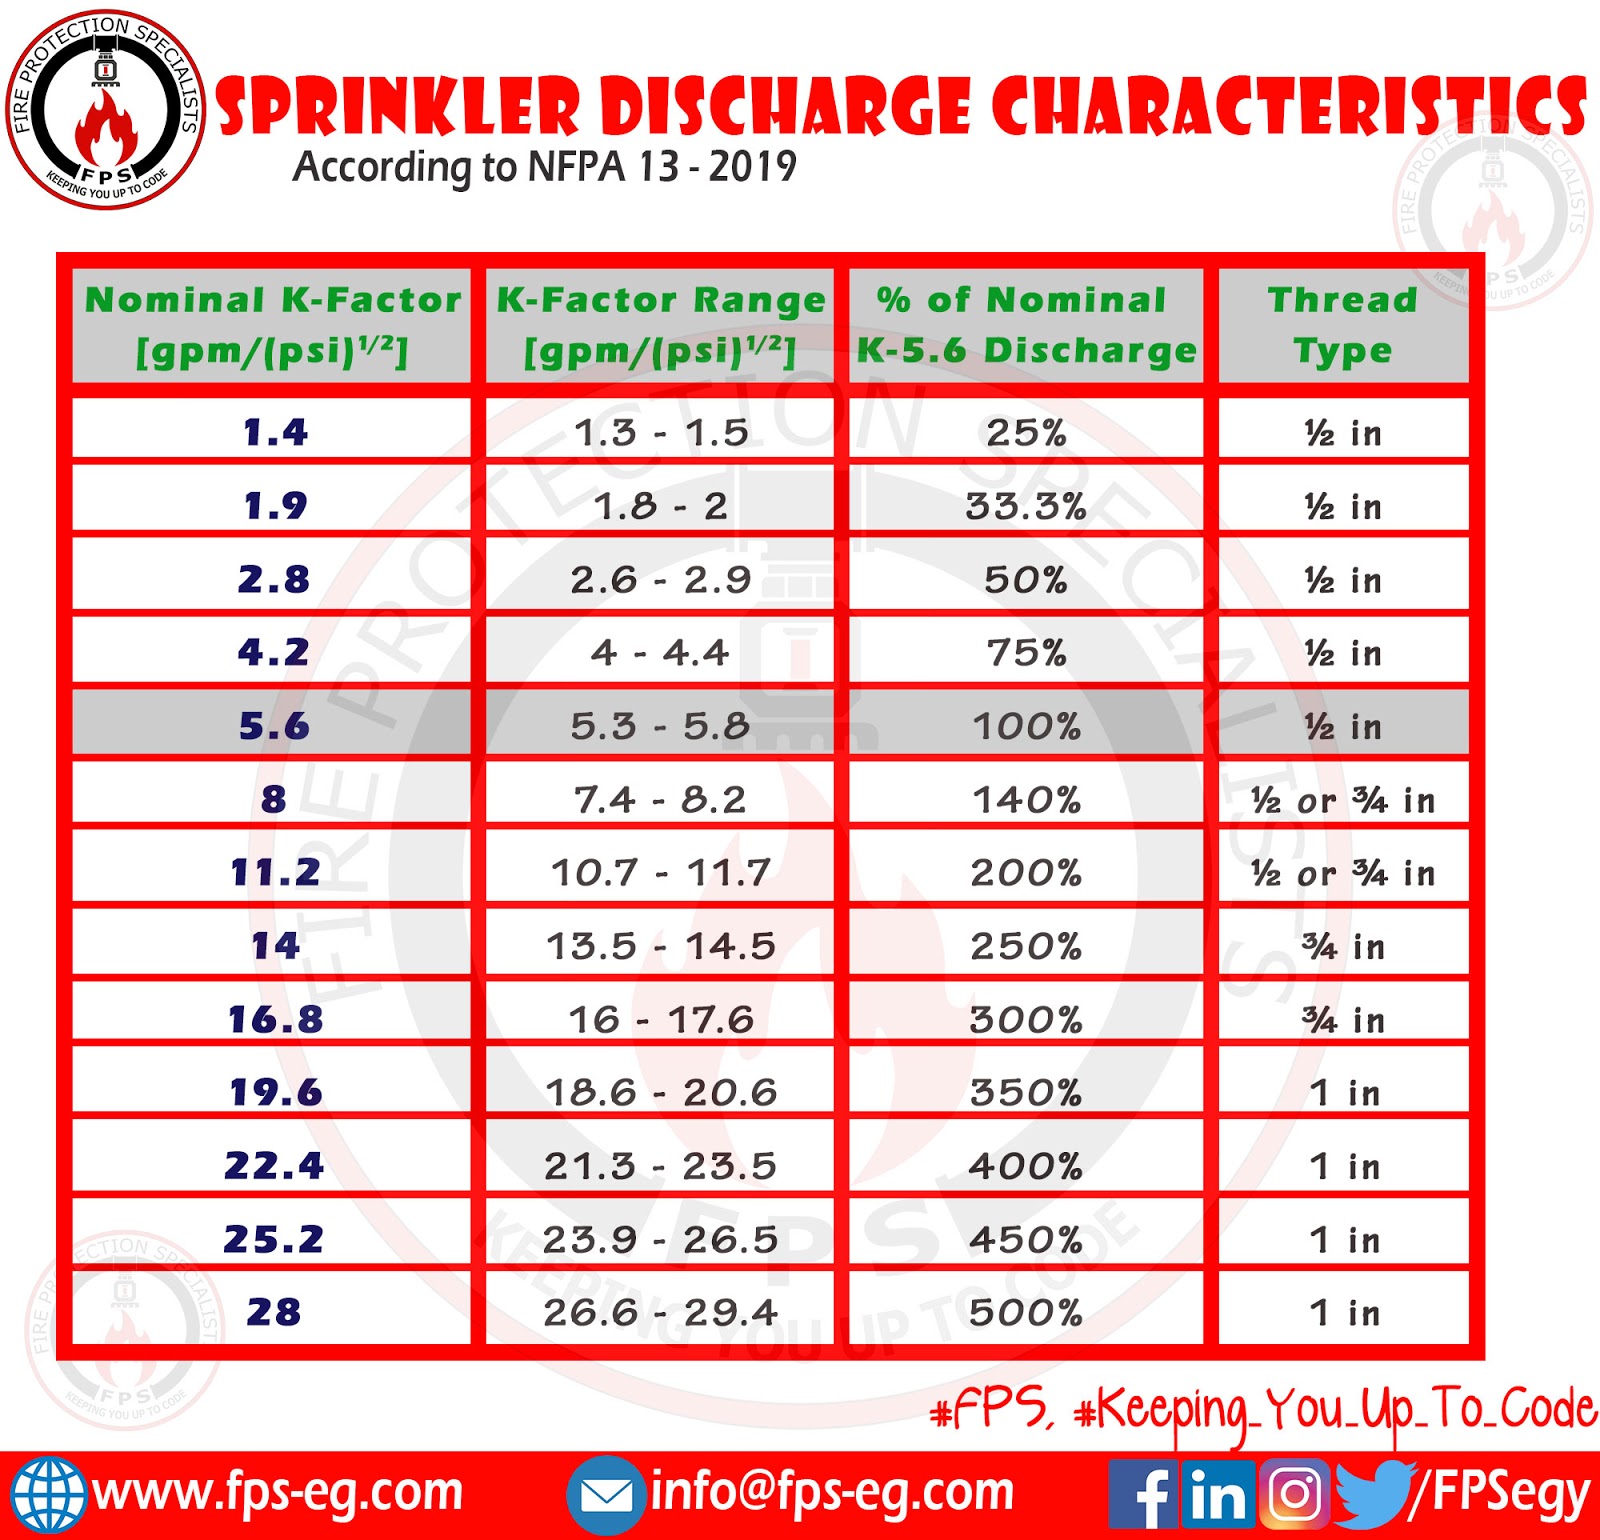 sprinkler-characteristics-according-to-nfpa-13-2019-edition